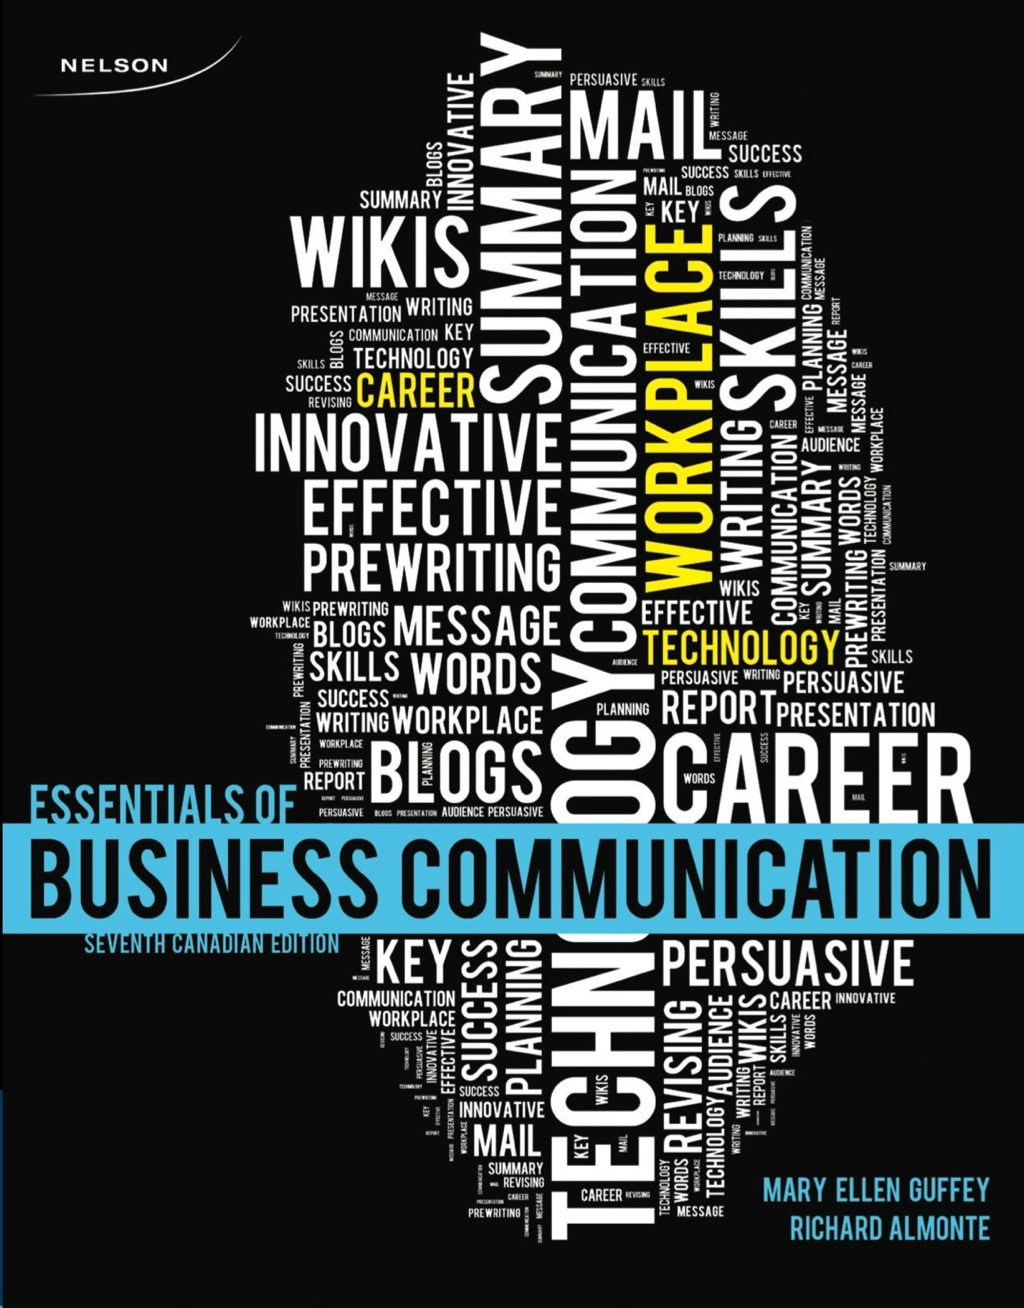 Essentials of Business Communication - 7th Edition (eBook Rental)